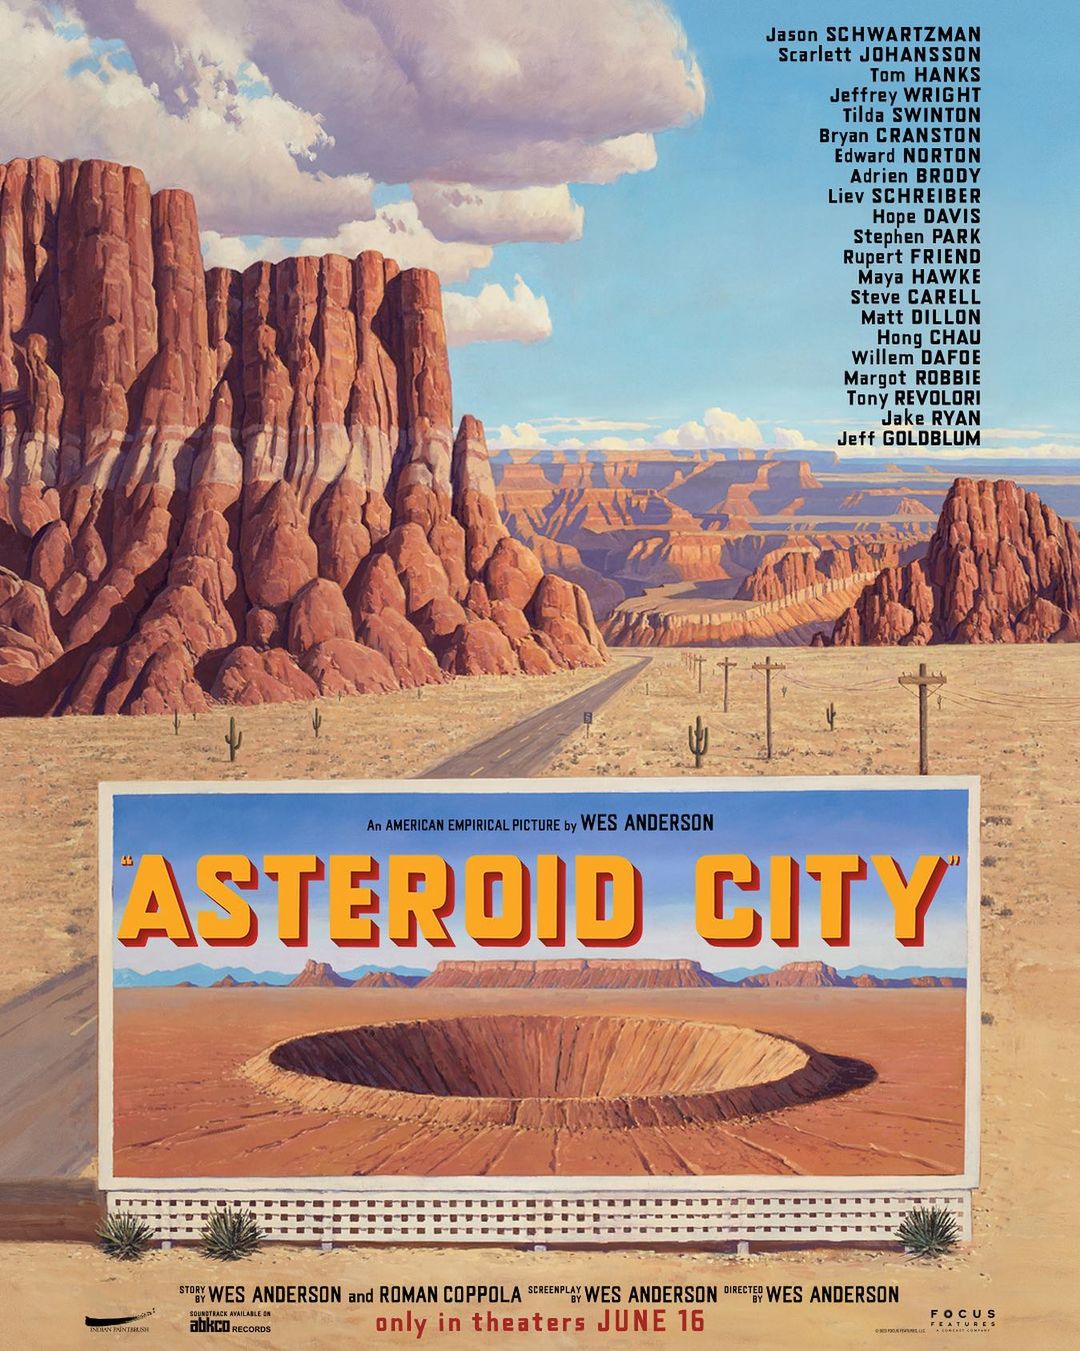 Asteroid City Movie (2023) Cast, Release Date, Story, Budget, Collection, Poster, Trailer, Review